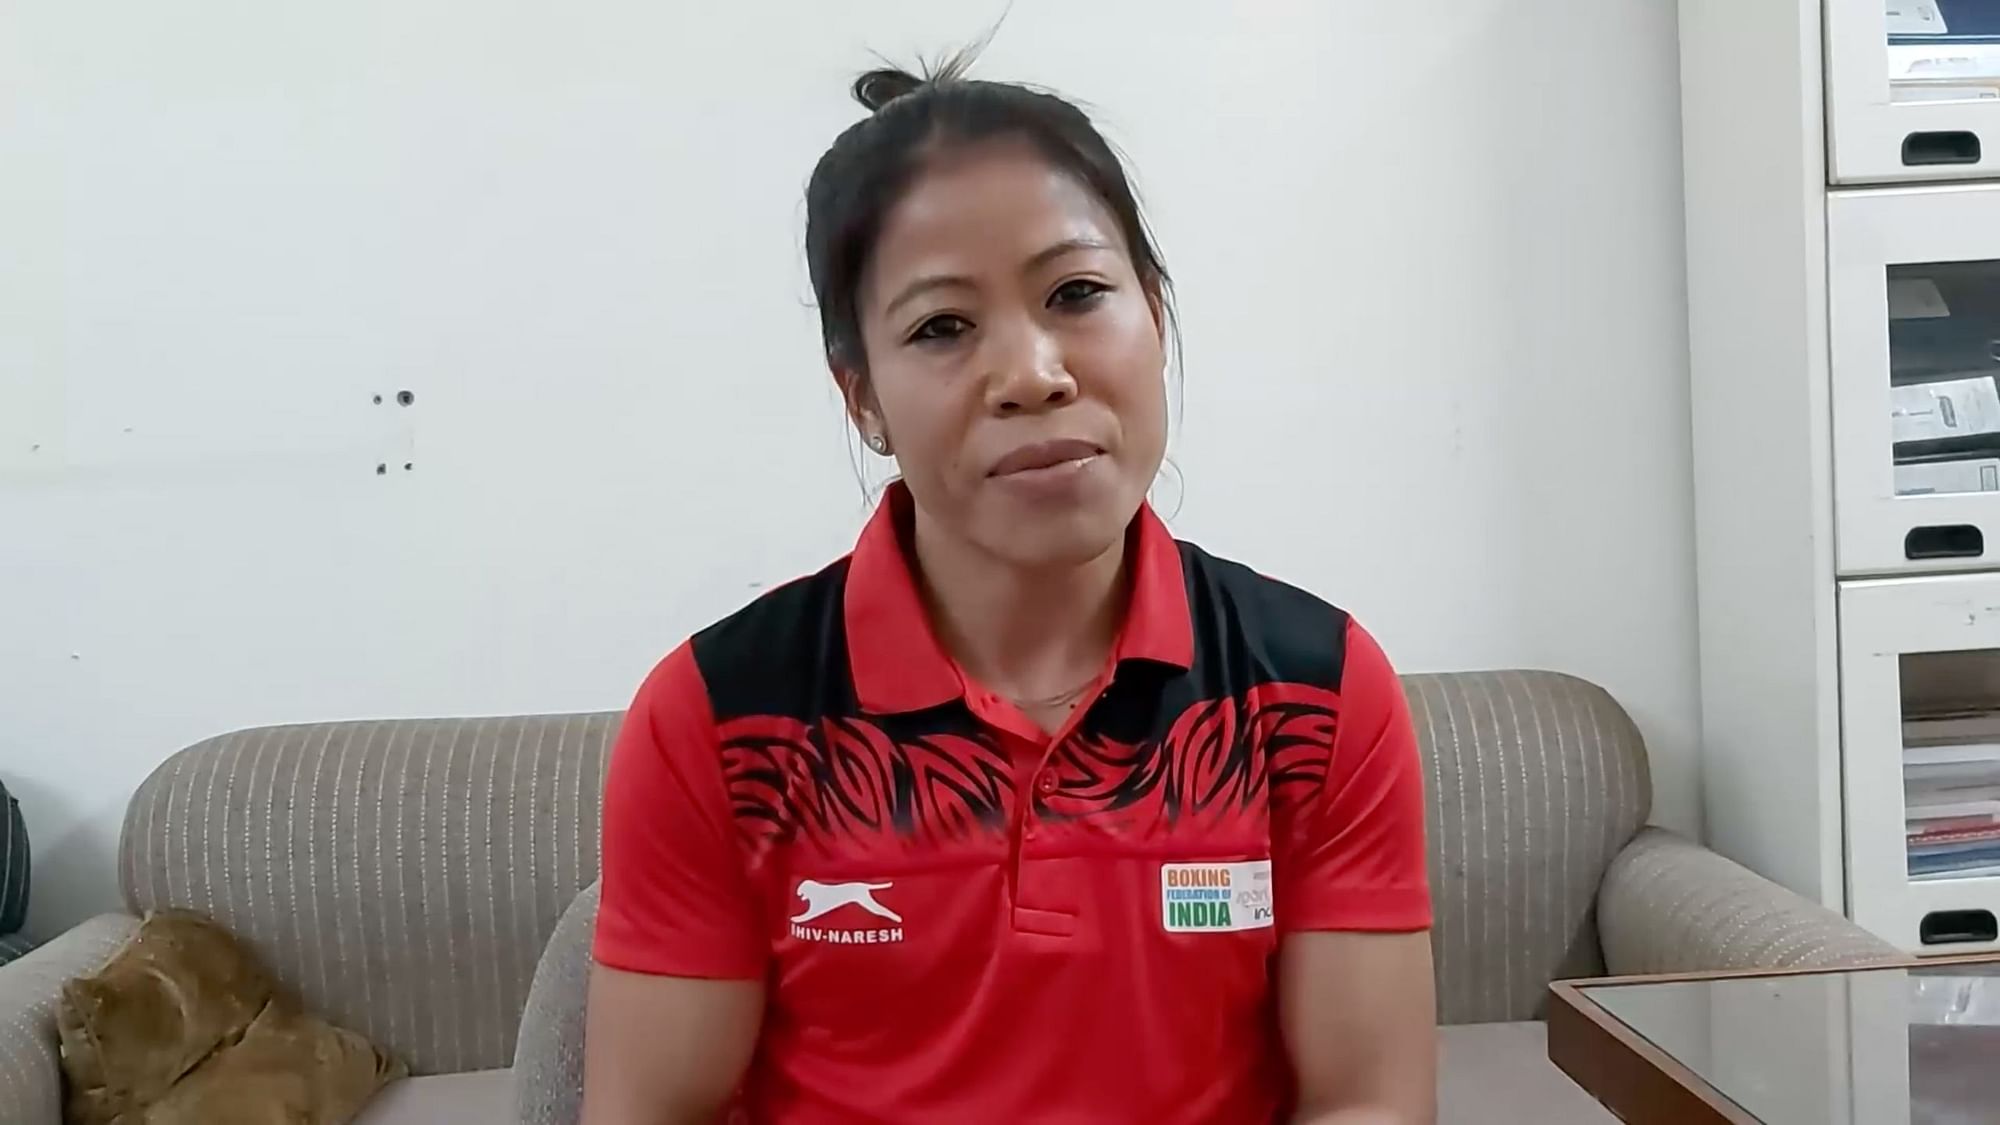 MC Mary Kom has called out the racist attacks on Northeasterners amid the fight against coronavirus.